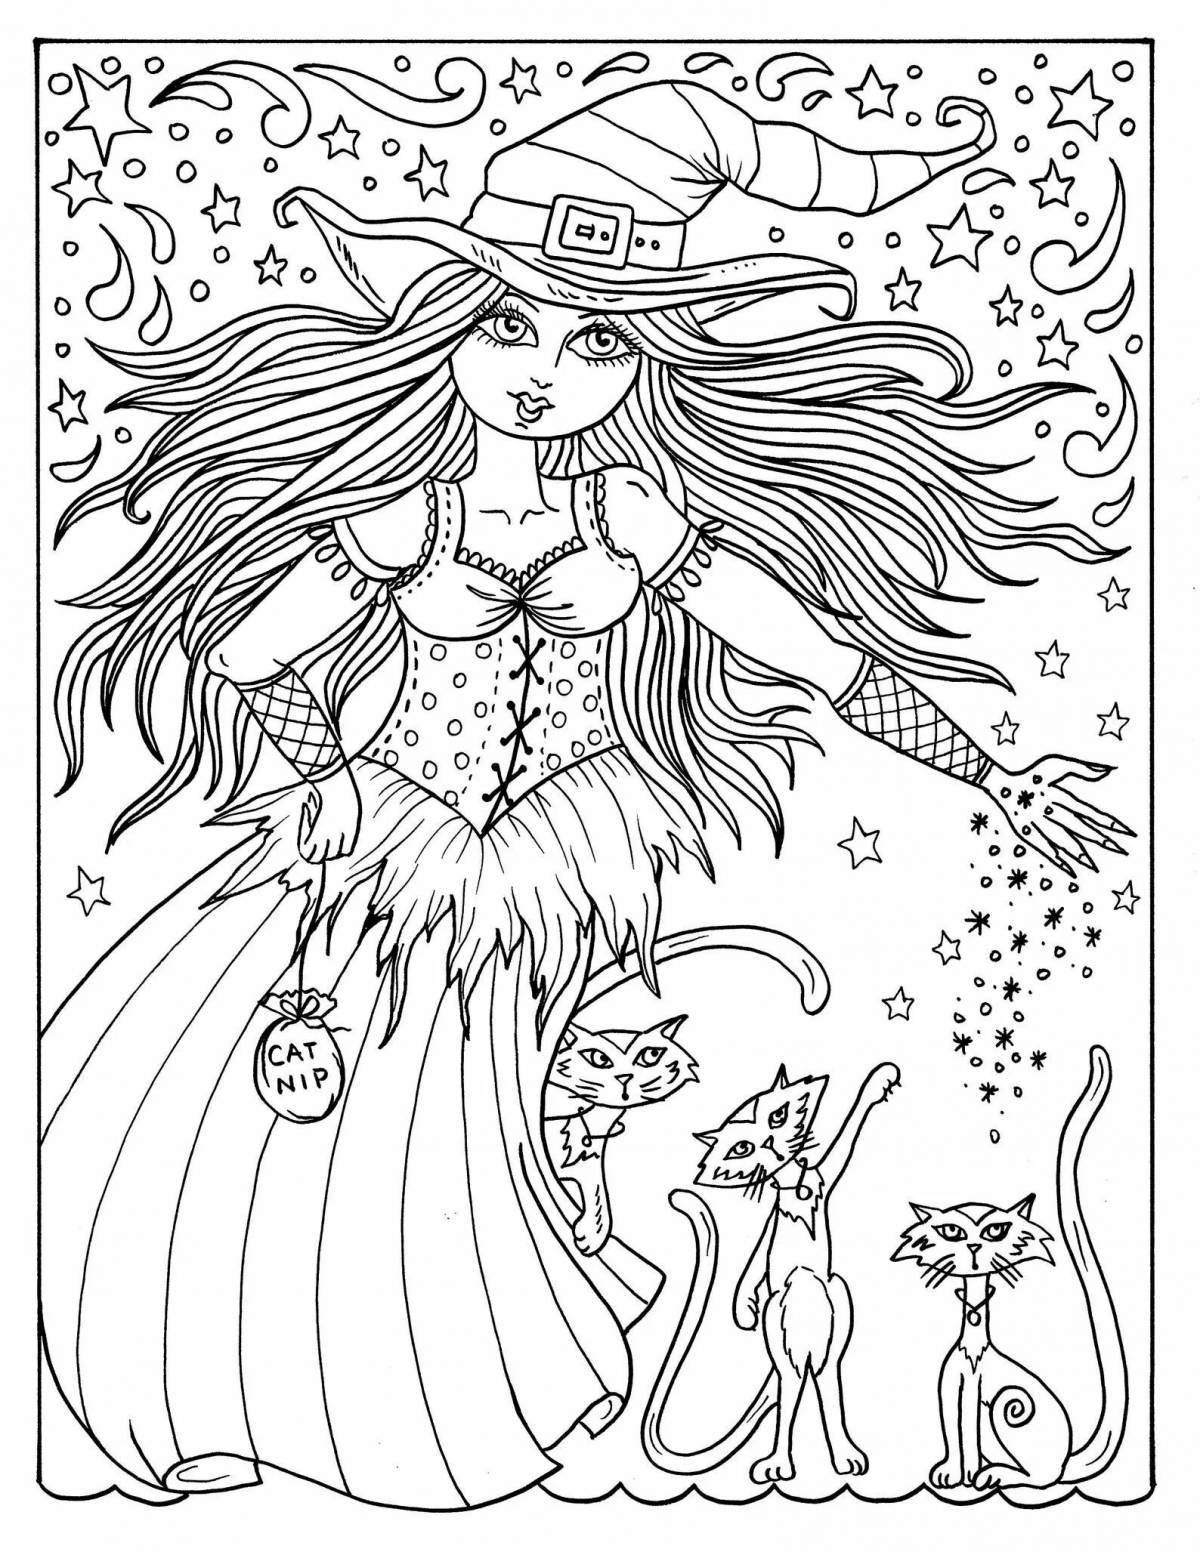 Bright aya and witch coloring book